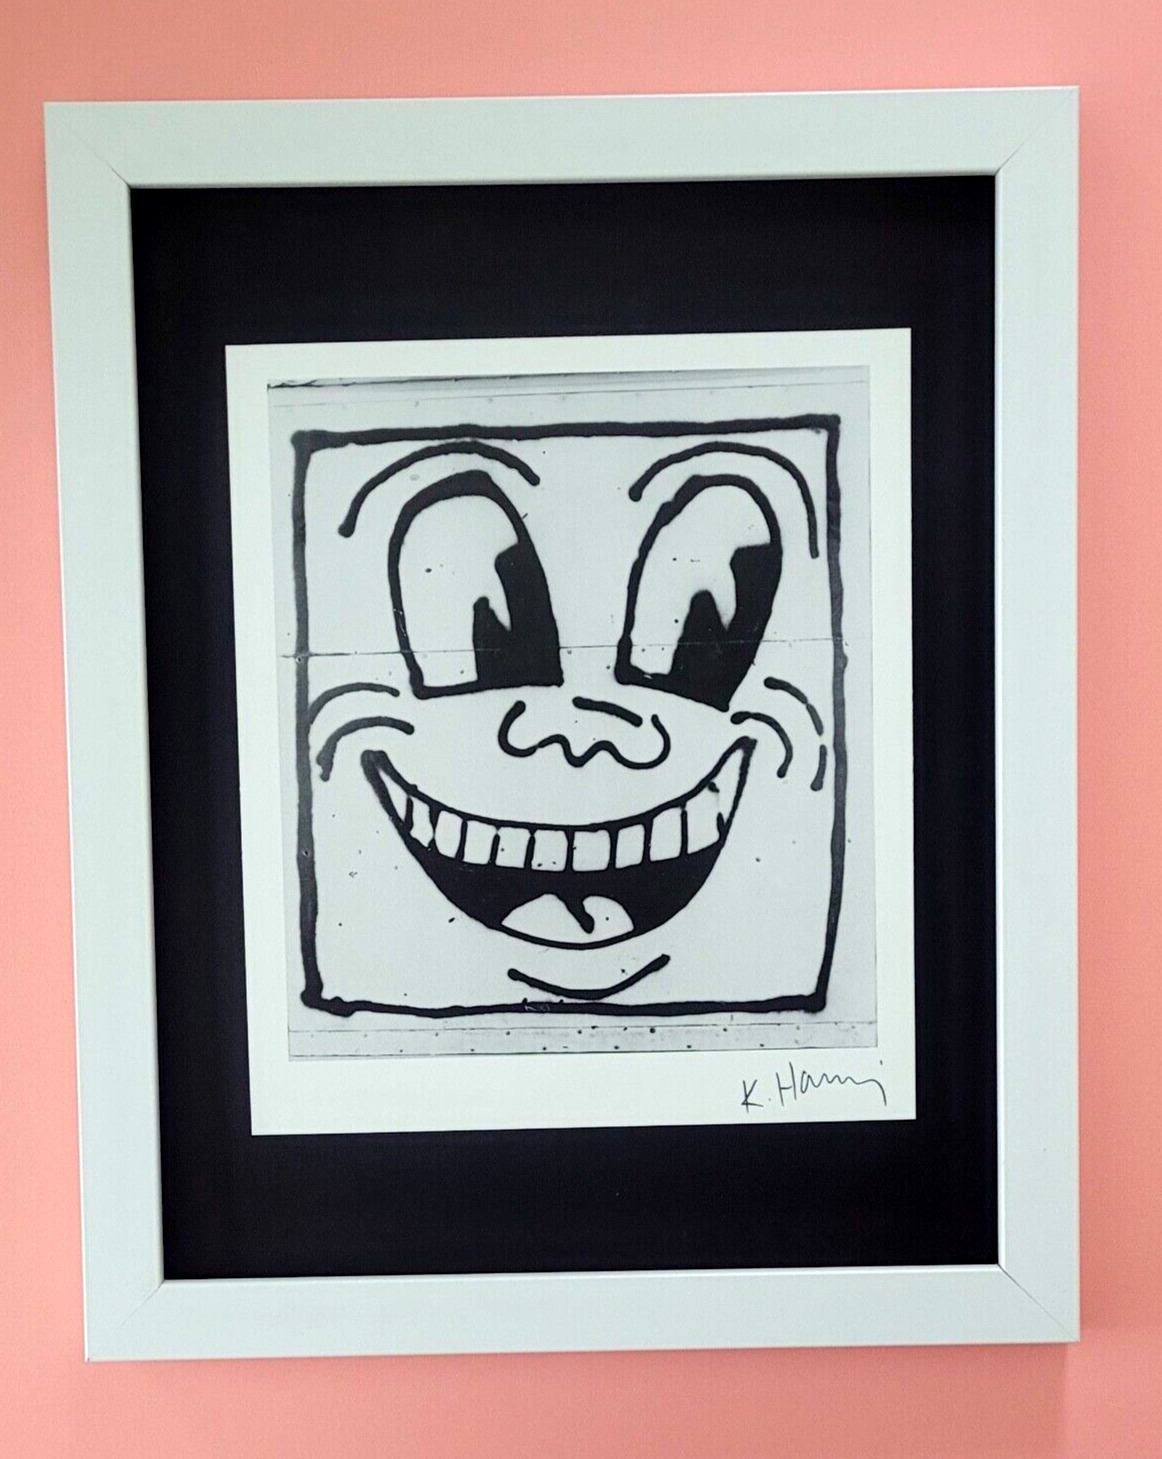 KEITH HARING + VINTAGE 1989 PRINT SIGNED MOUNTED AND FRAMED + BUY IT NOW